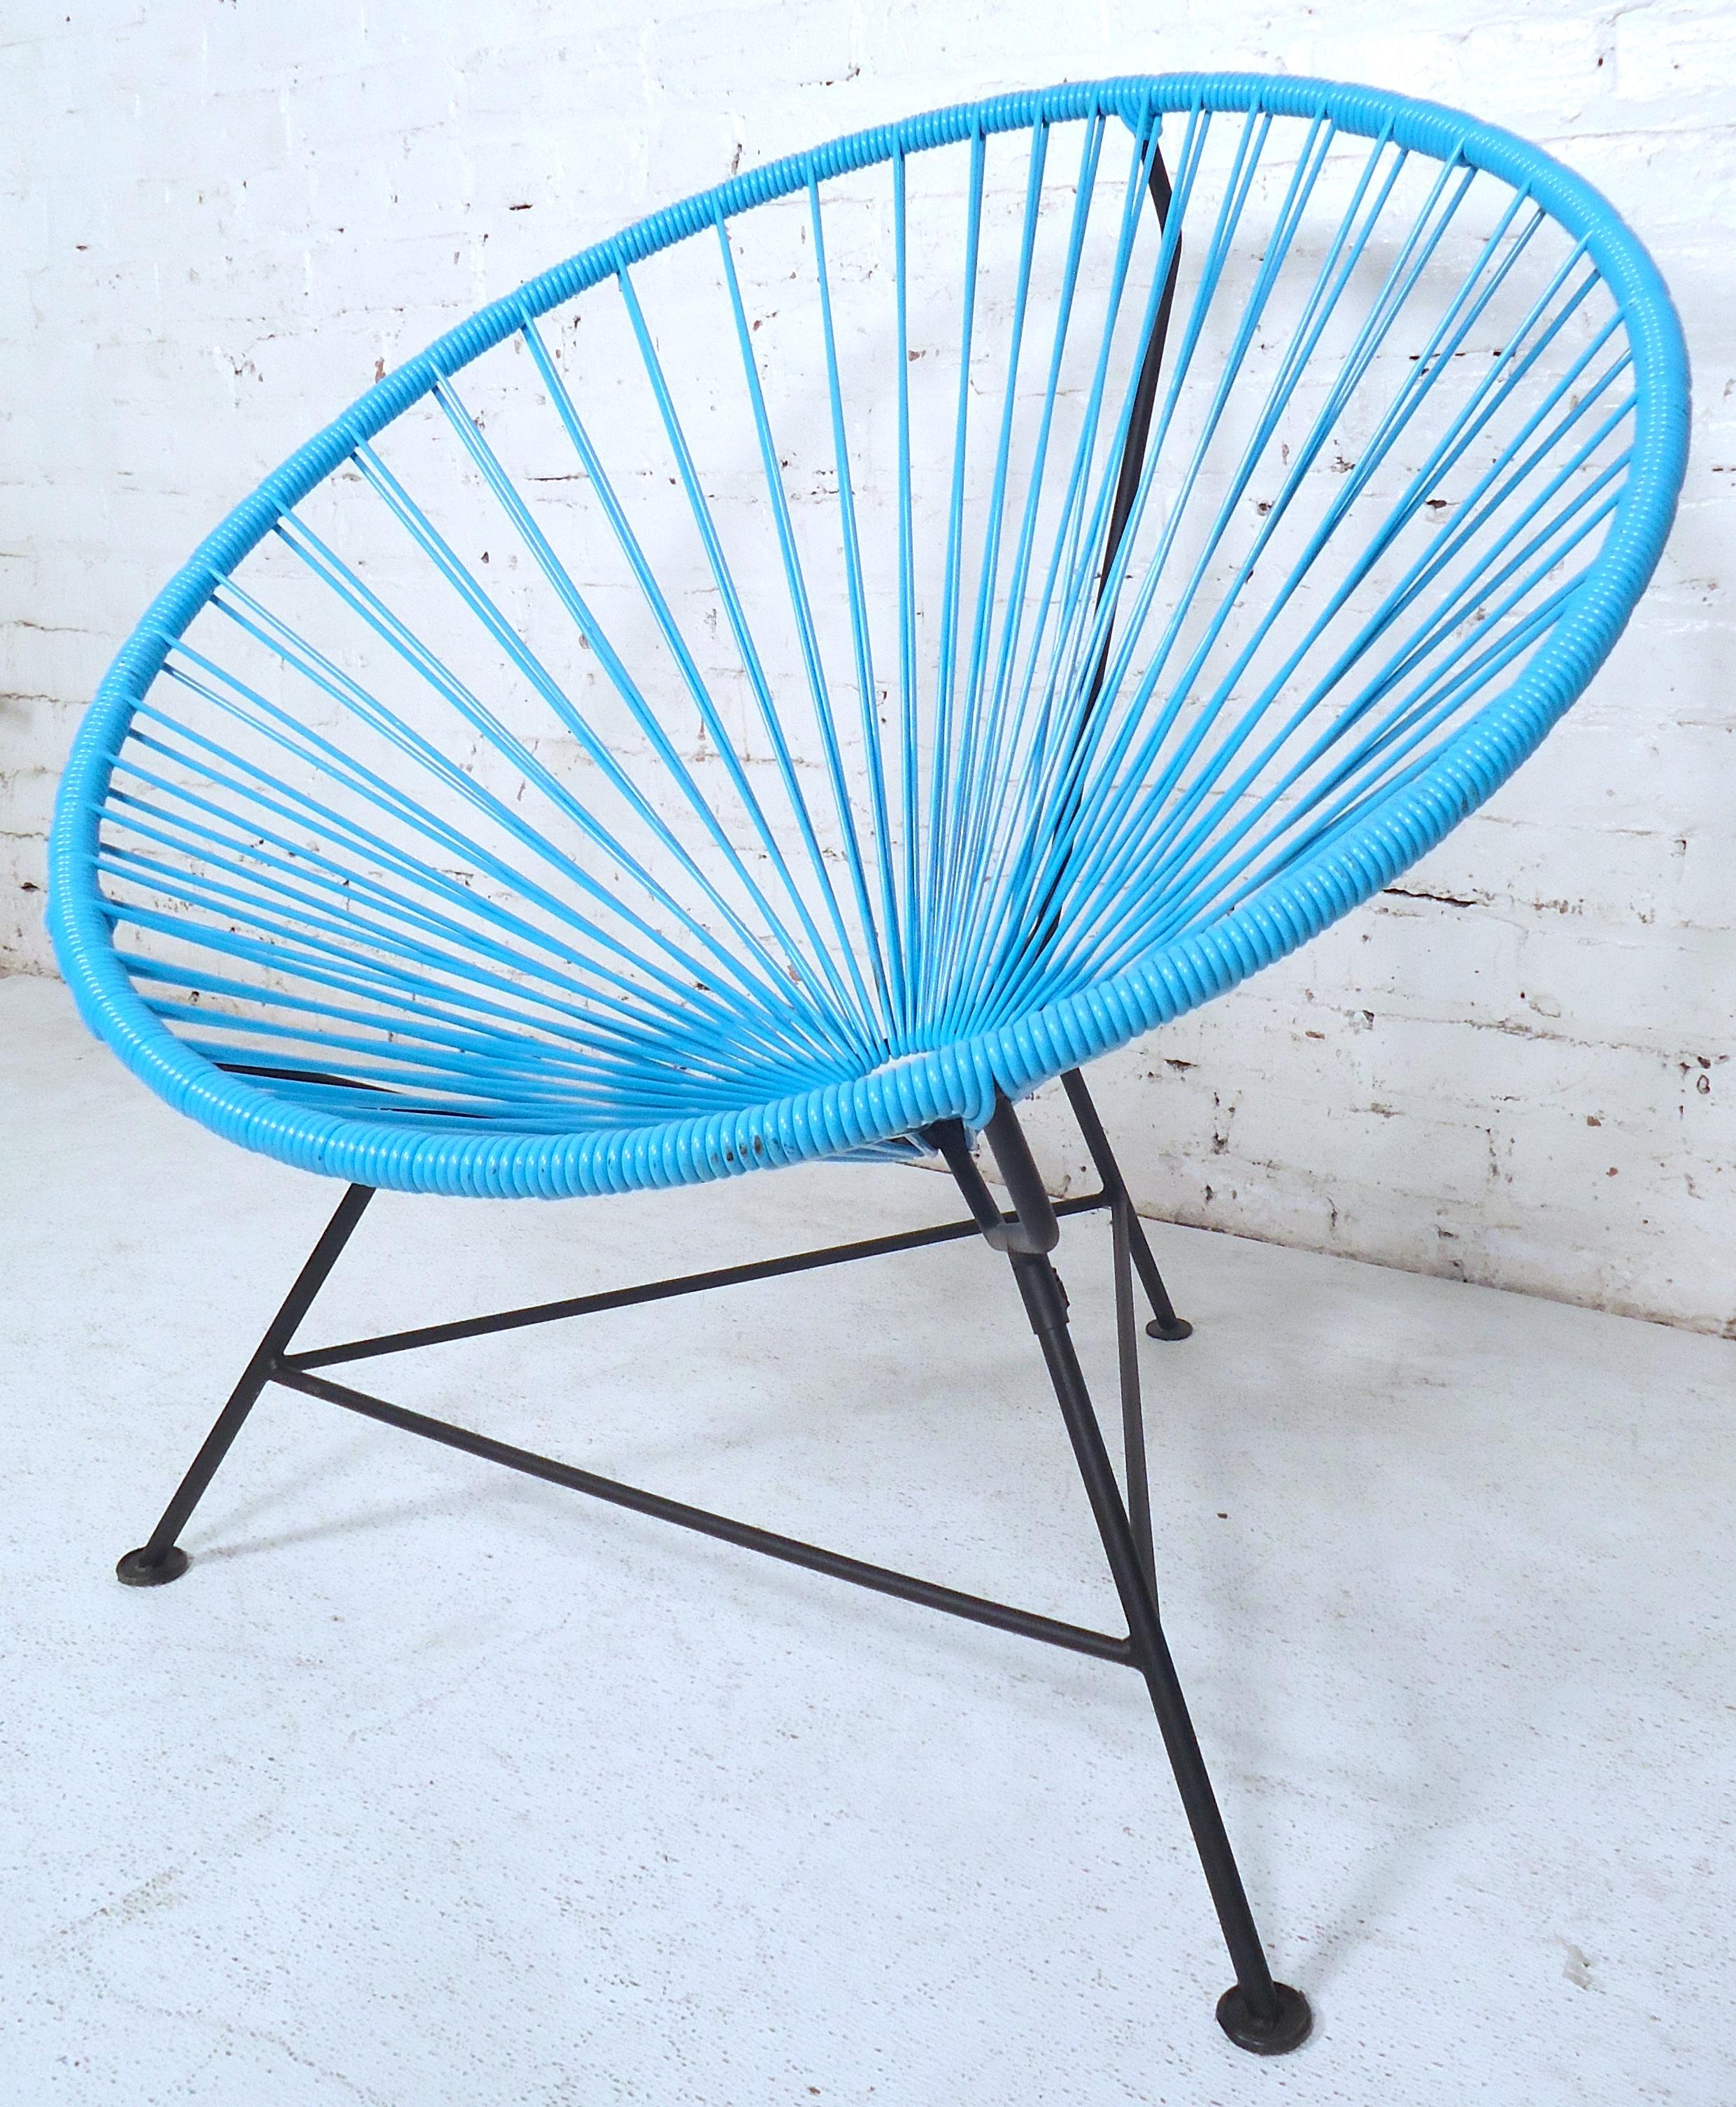 Classic designed chair from the 1950s made from plastic wire and steel.

Please confirm item location (NY or NJ).